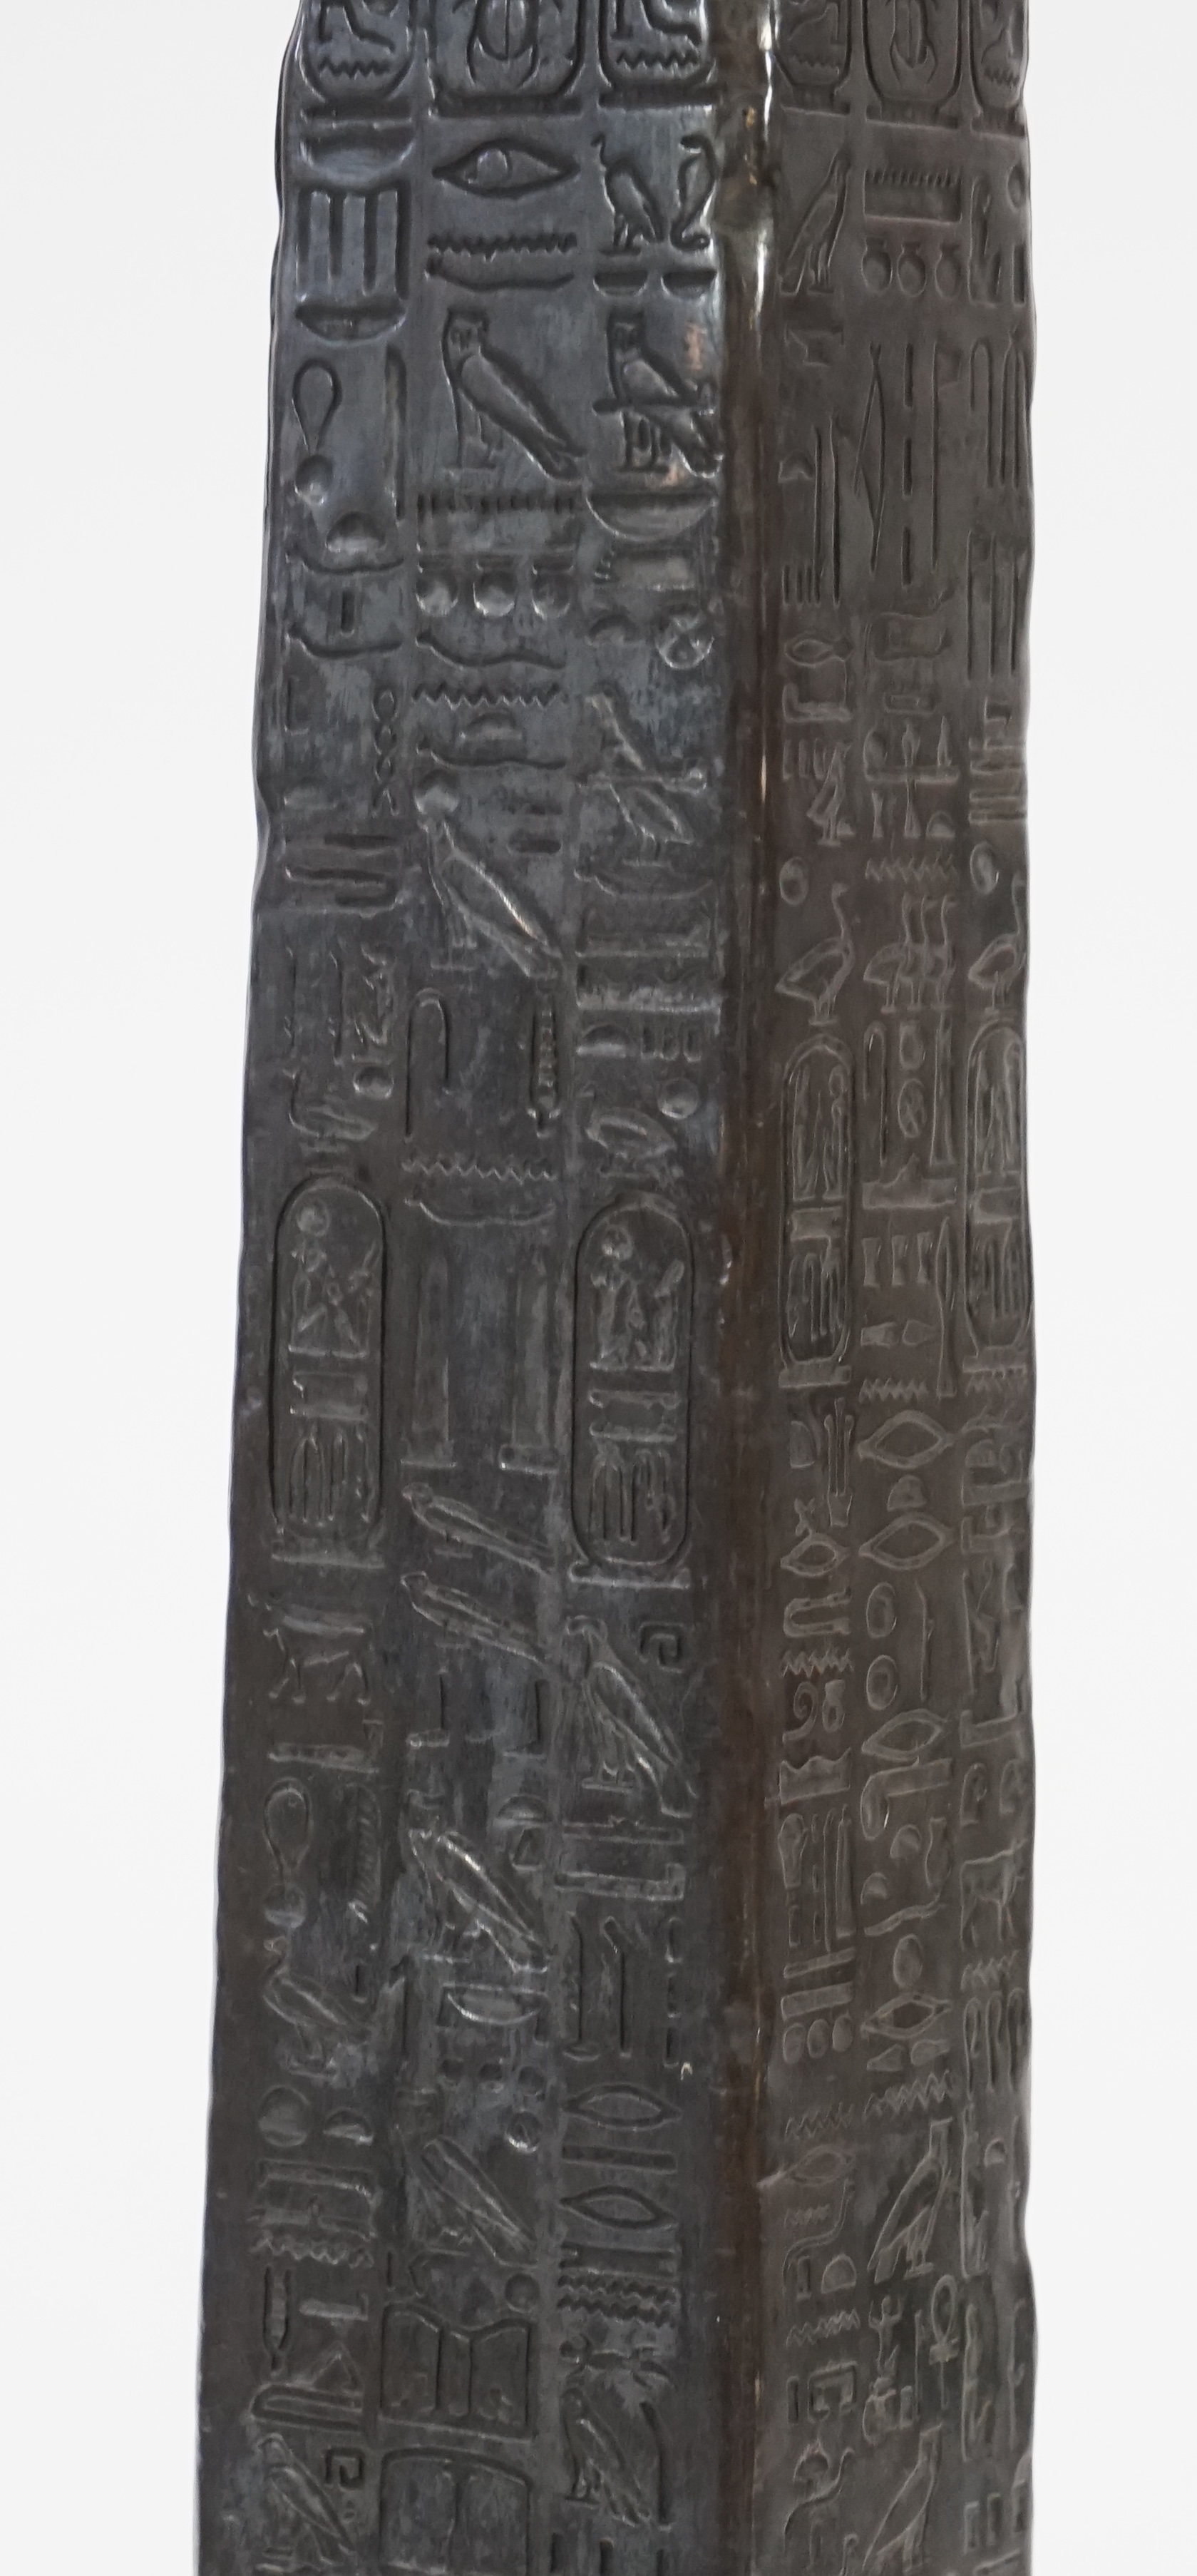 A 19th century Grand Tour style bronzed model of Cleopatra's Needle